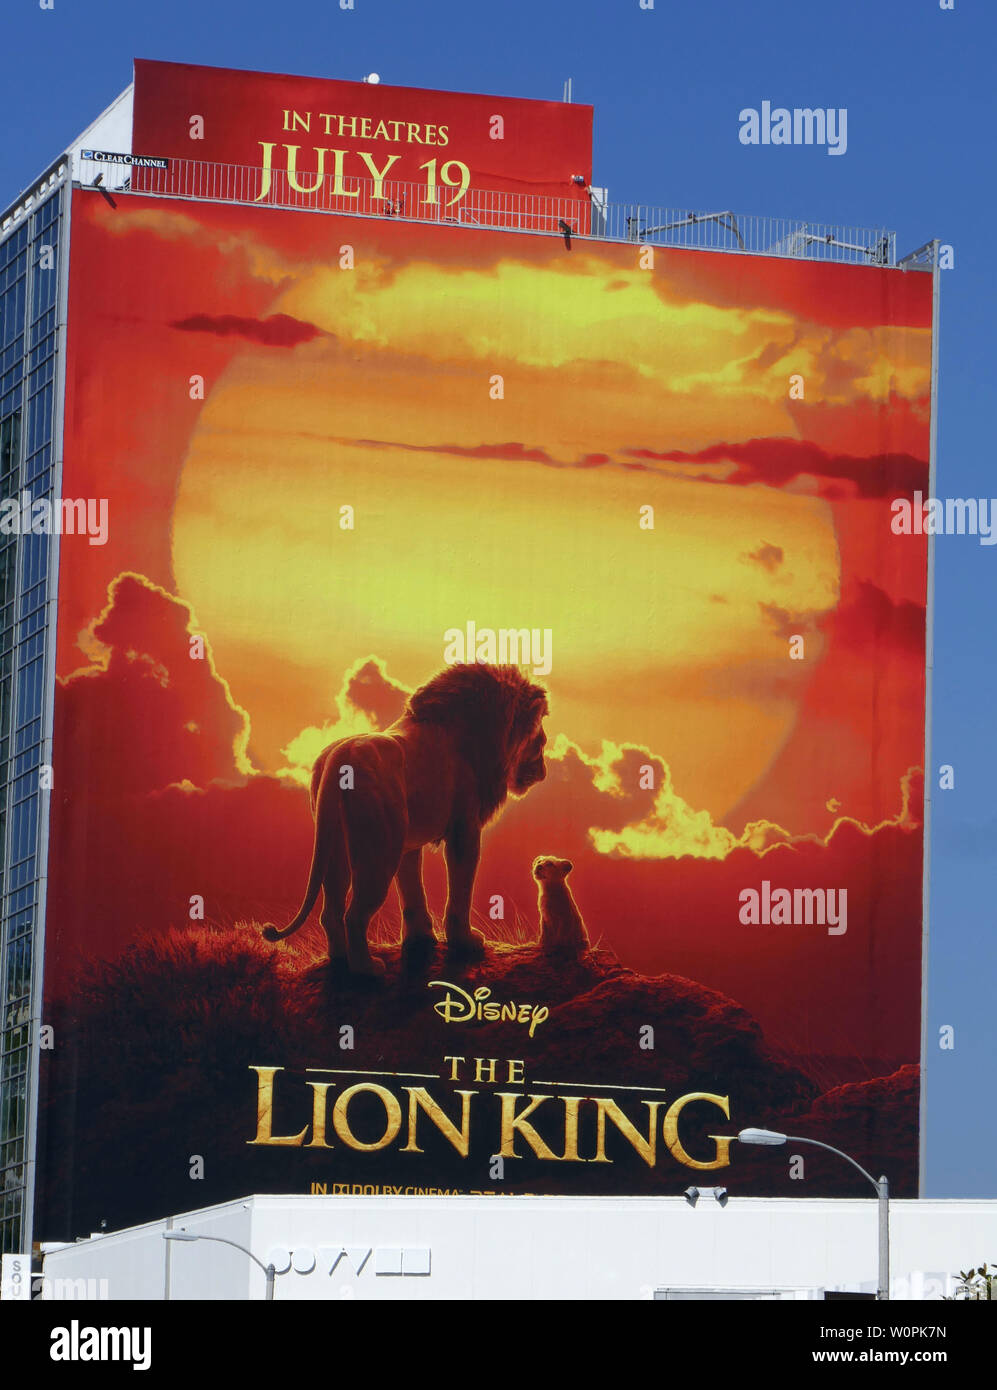 Los Angeles, California, USA 27th June 2019 A general view of atmosphere of Disney's 'The Lion King' on June 27, 2019 on Sunset Blvd in Los Angeles, California, USA. Photo by Barry King/Alamy Stock Photo Stock Photo